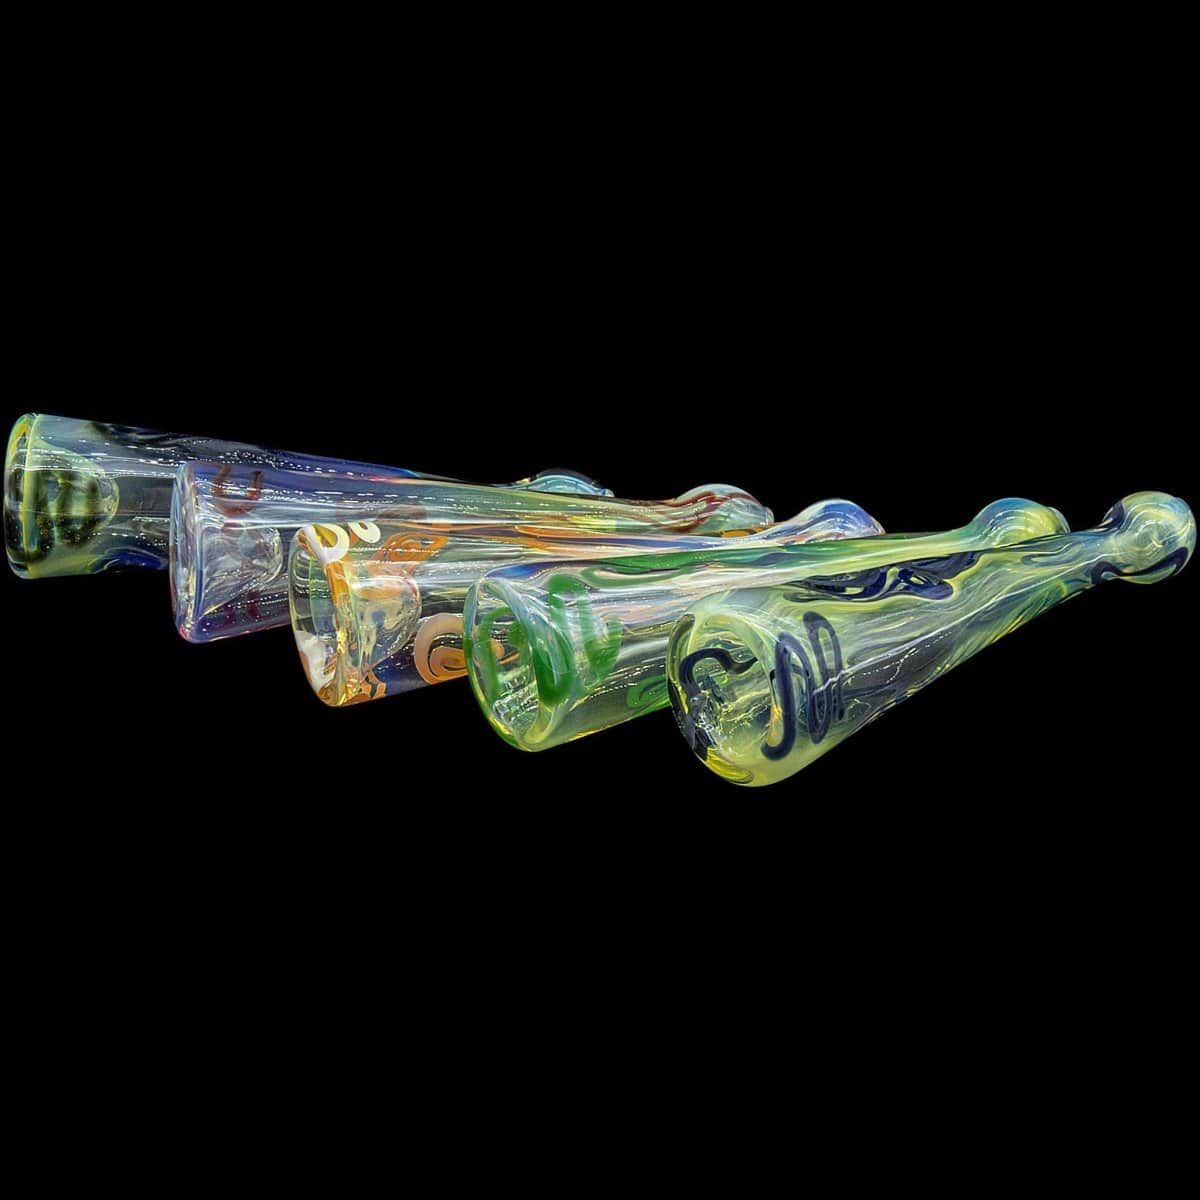 LA Pipes Hand Pipe "Warrior Piper" Inside-Out Funnel Chillum Herb Pipe